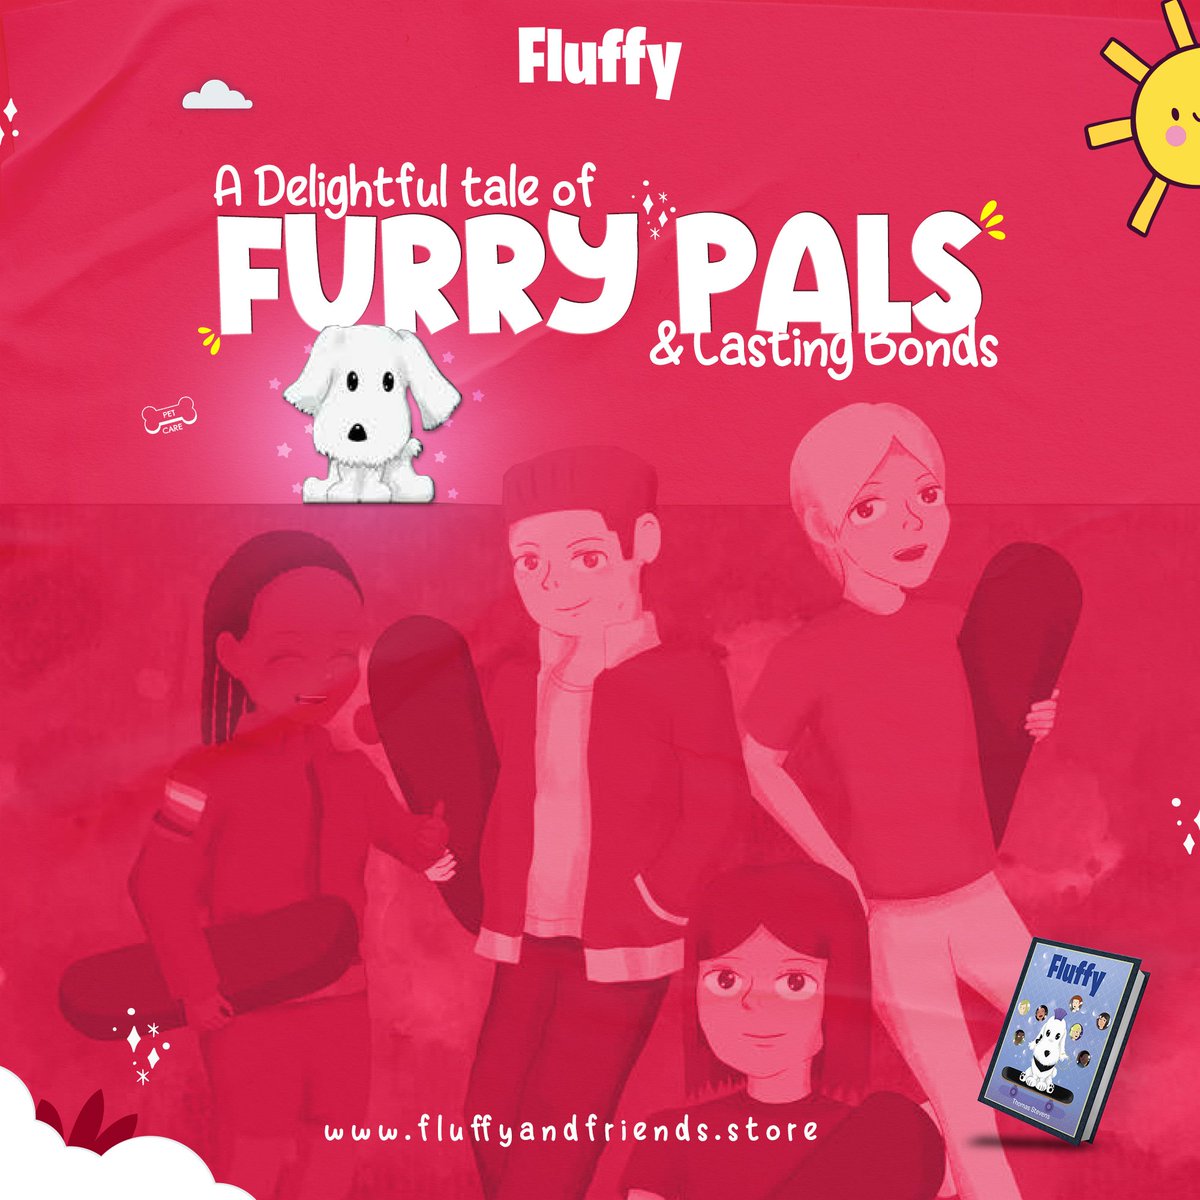 Join Fluffy's furry adventure and dive into the colorful pages of 'Fluffy'. Snuggle up with Fluffy and let the enchantment begin! amzn.com/1662454406/ #Fluffy #ThomasStevens #FluffyAndFriends #inclusivity #inclusivitymatters #diversity #bookish #bookish #booktwt #writerslift